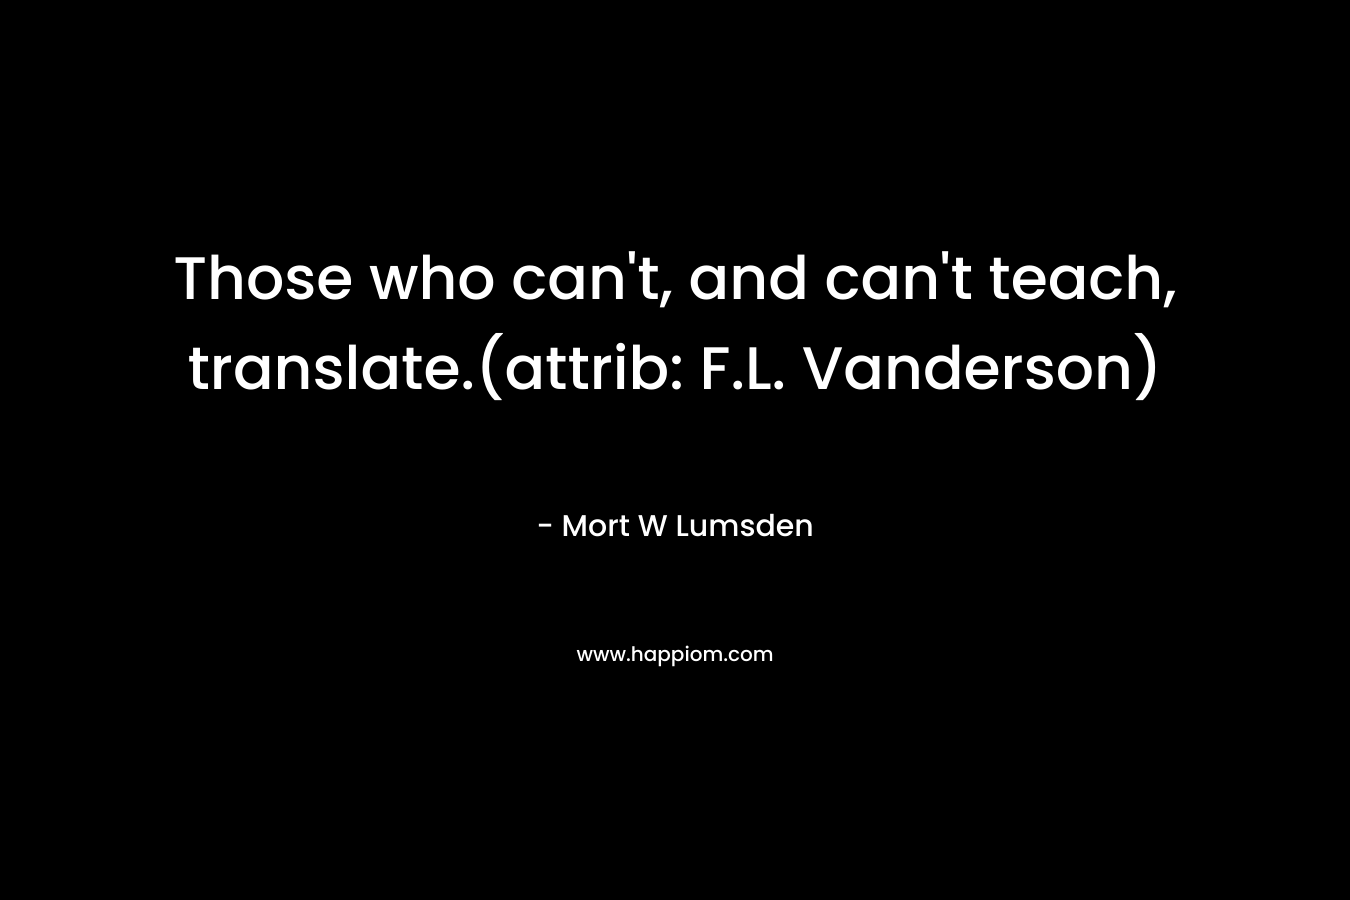 Those who can't, and can't teach, translate.(attrib: F.L. Vanderson)